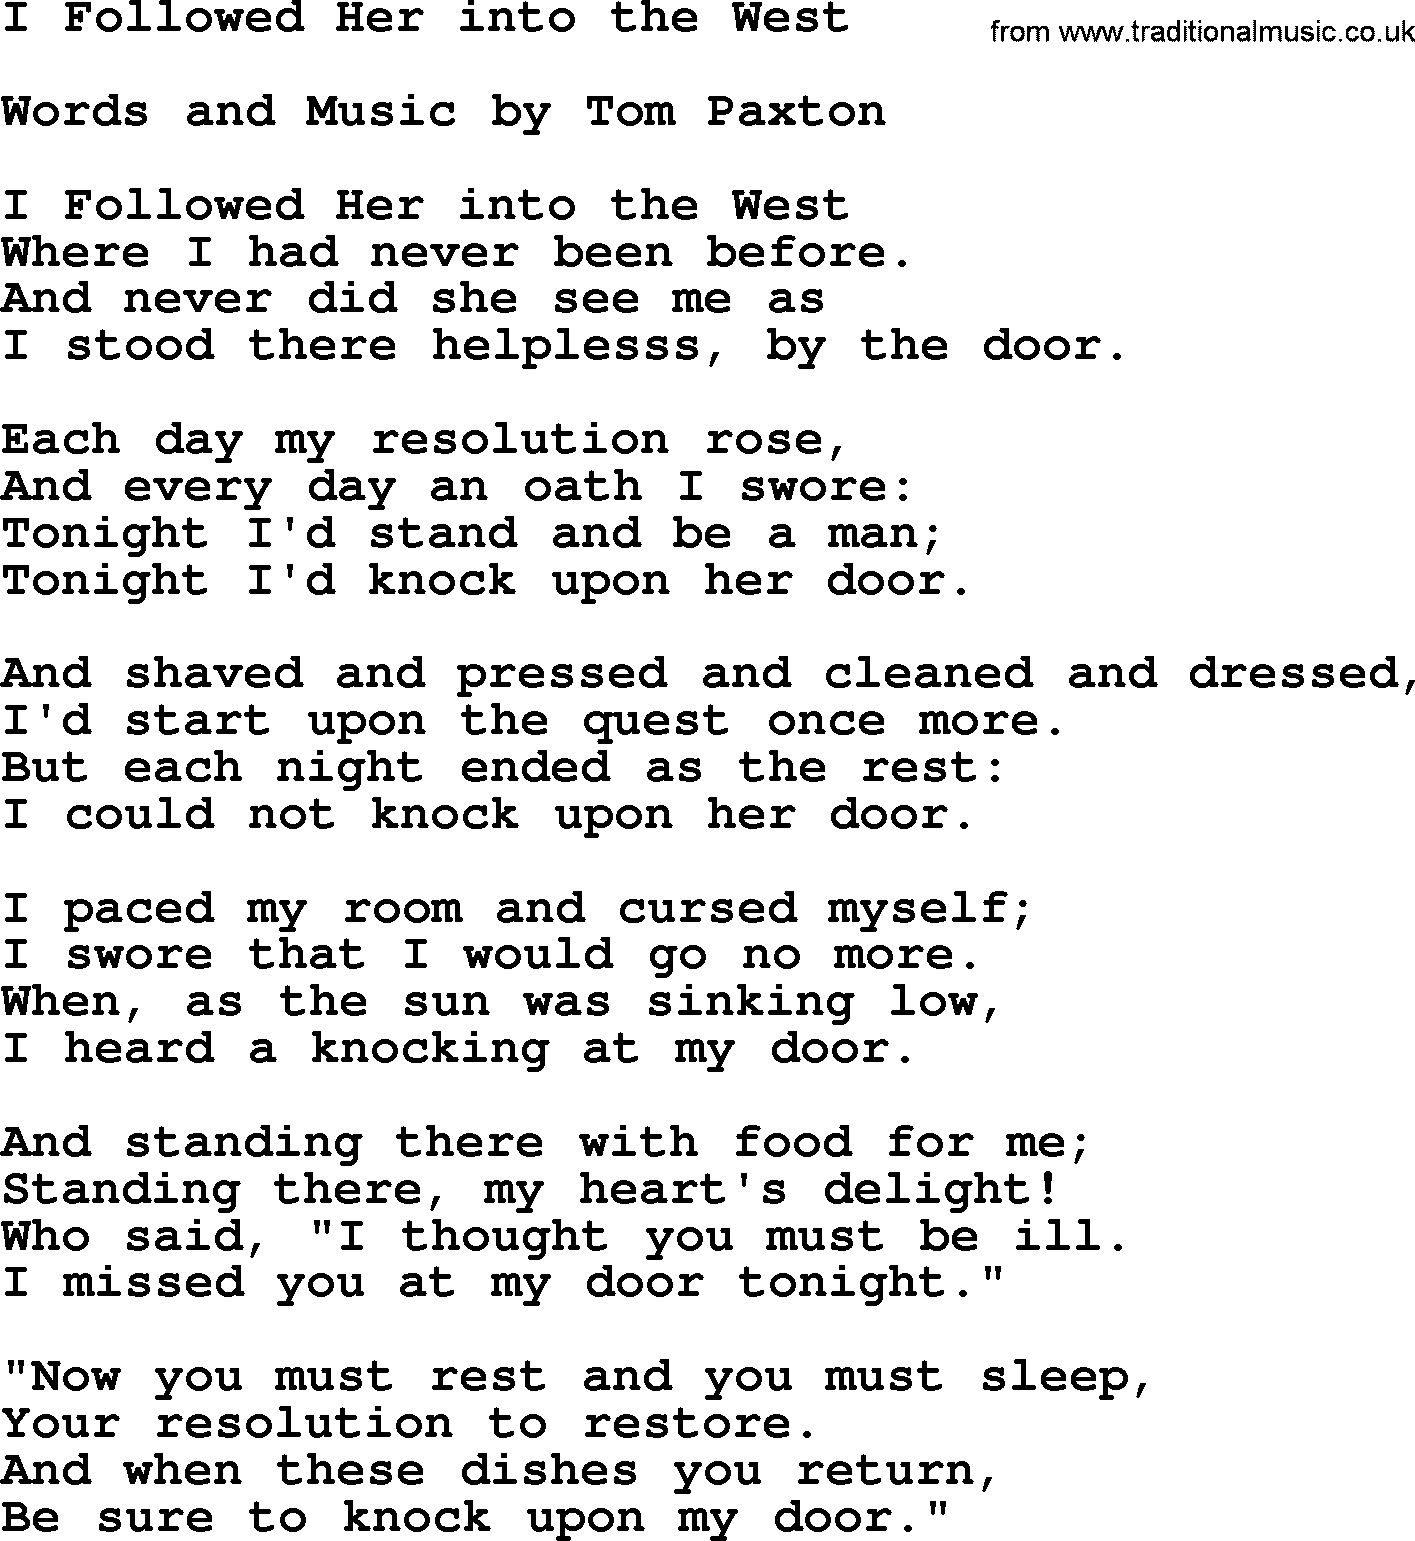 Tom Paxton song: I Followed Her Into The West, lyrics